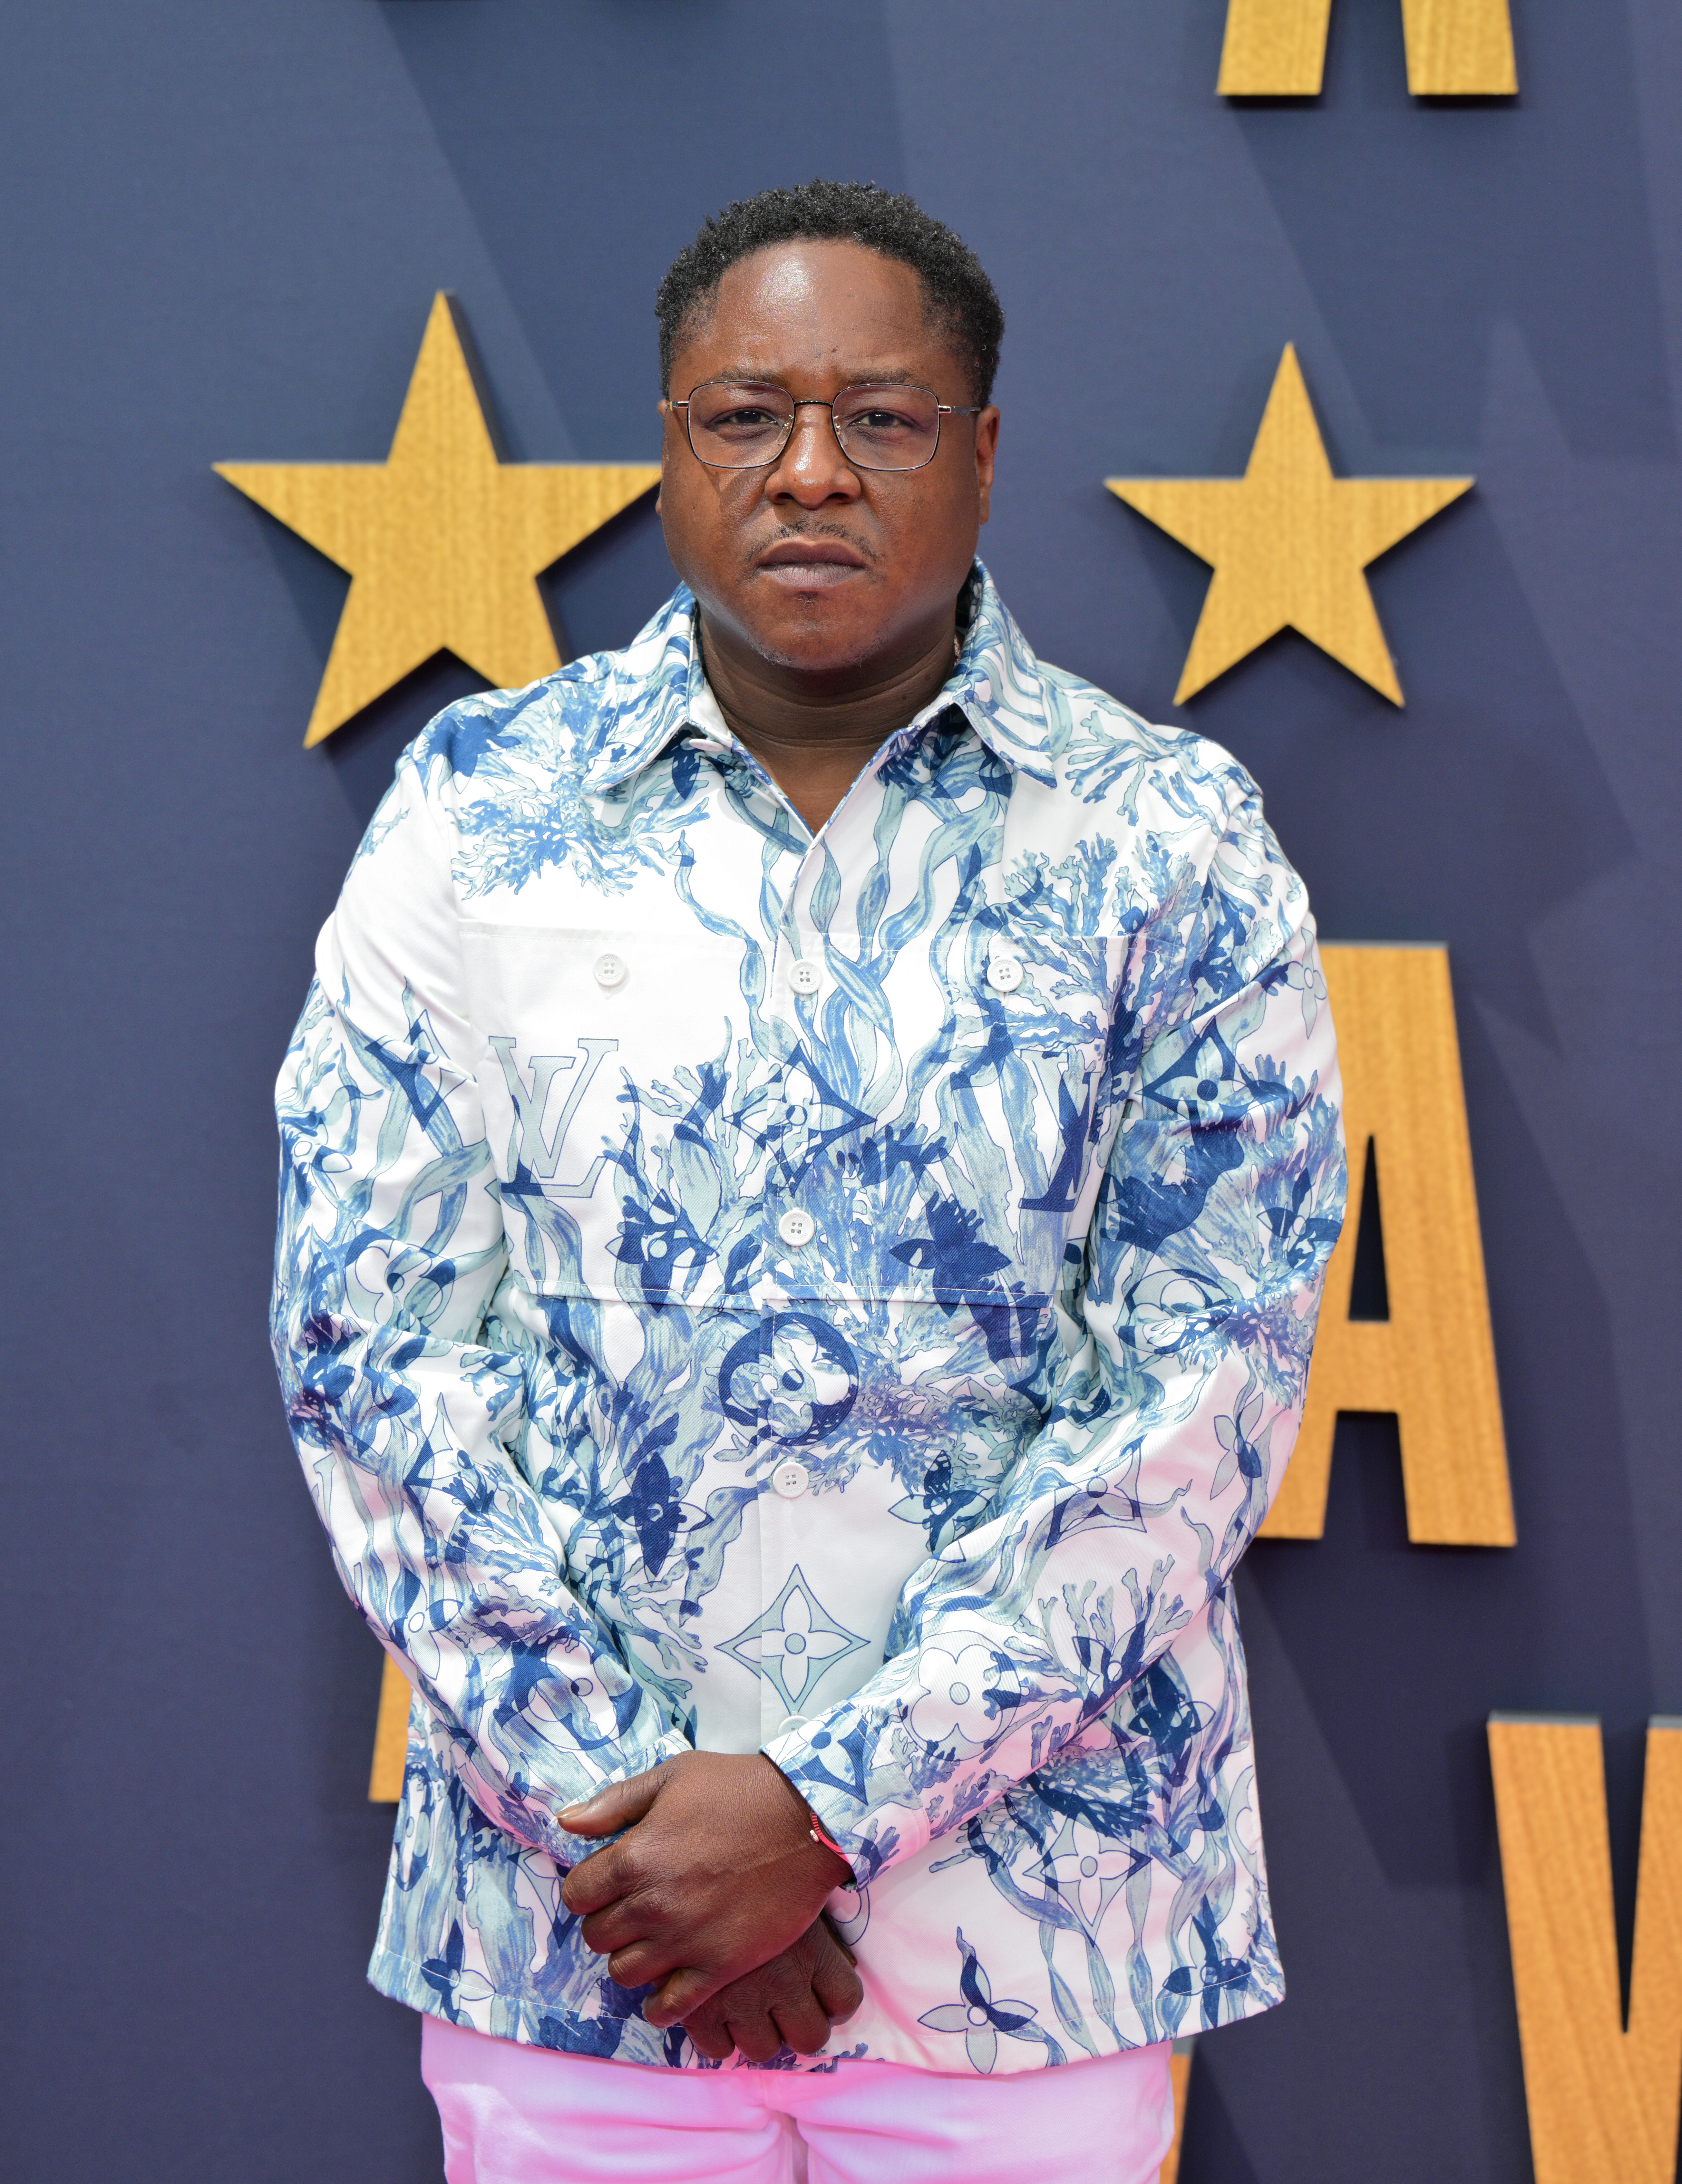 Jadakiss arrives to the 2023 BET Awards at Microsoft Theater on June 25, 2023, in Los Angeles, California. | Source: Getty Images